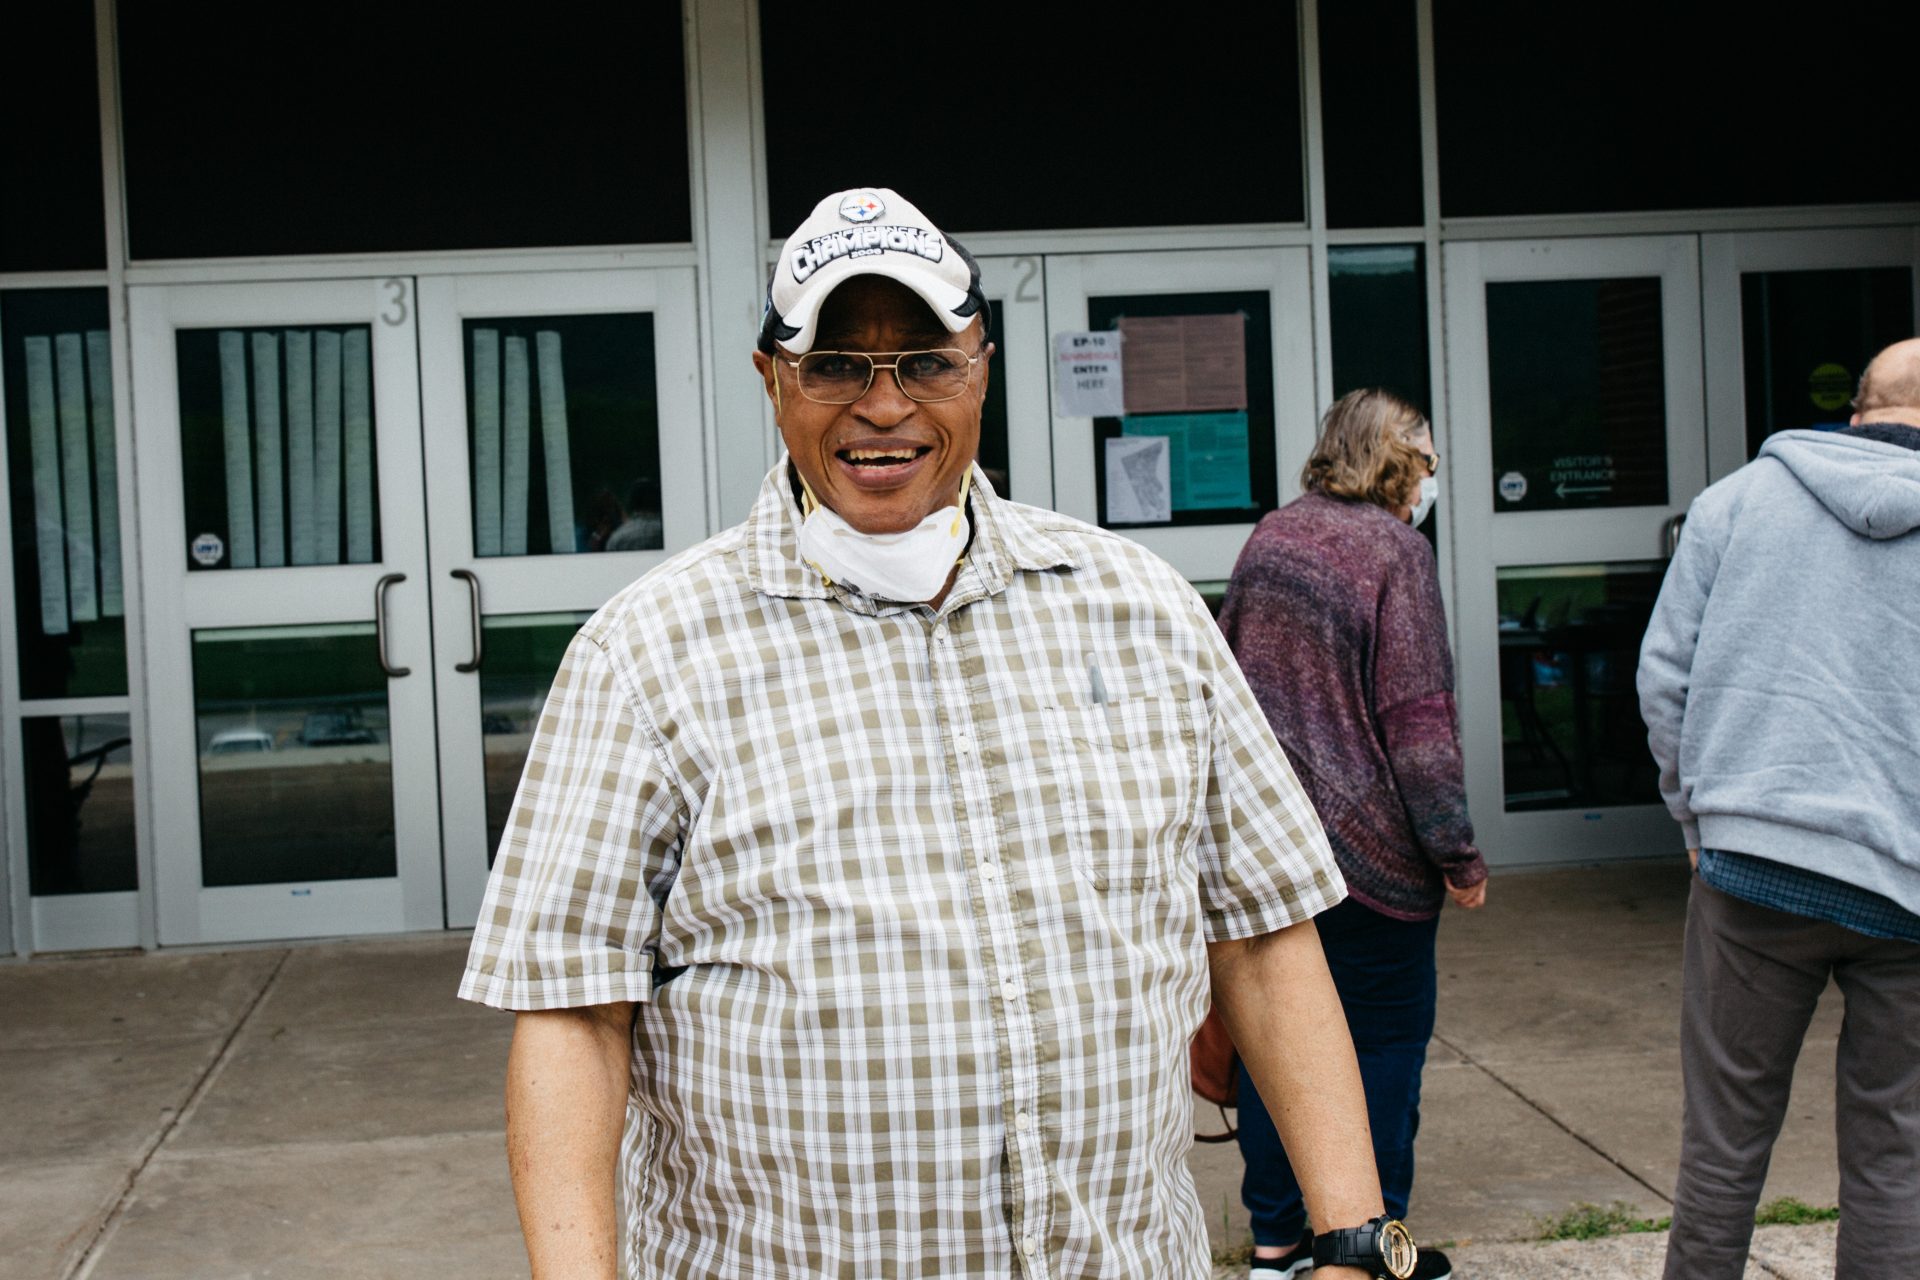 A voter outside of East Pennsboro Middle School, where East Pennsboro 1, 3, 8, 9 polling places were all combined, on June 2, 2020.